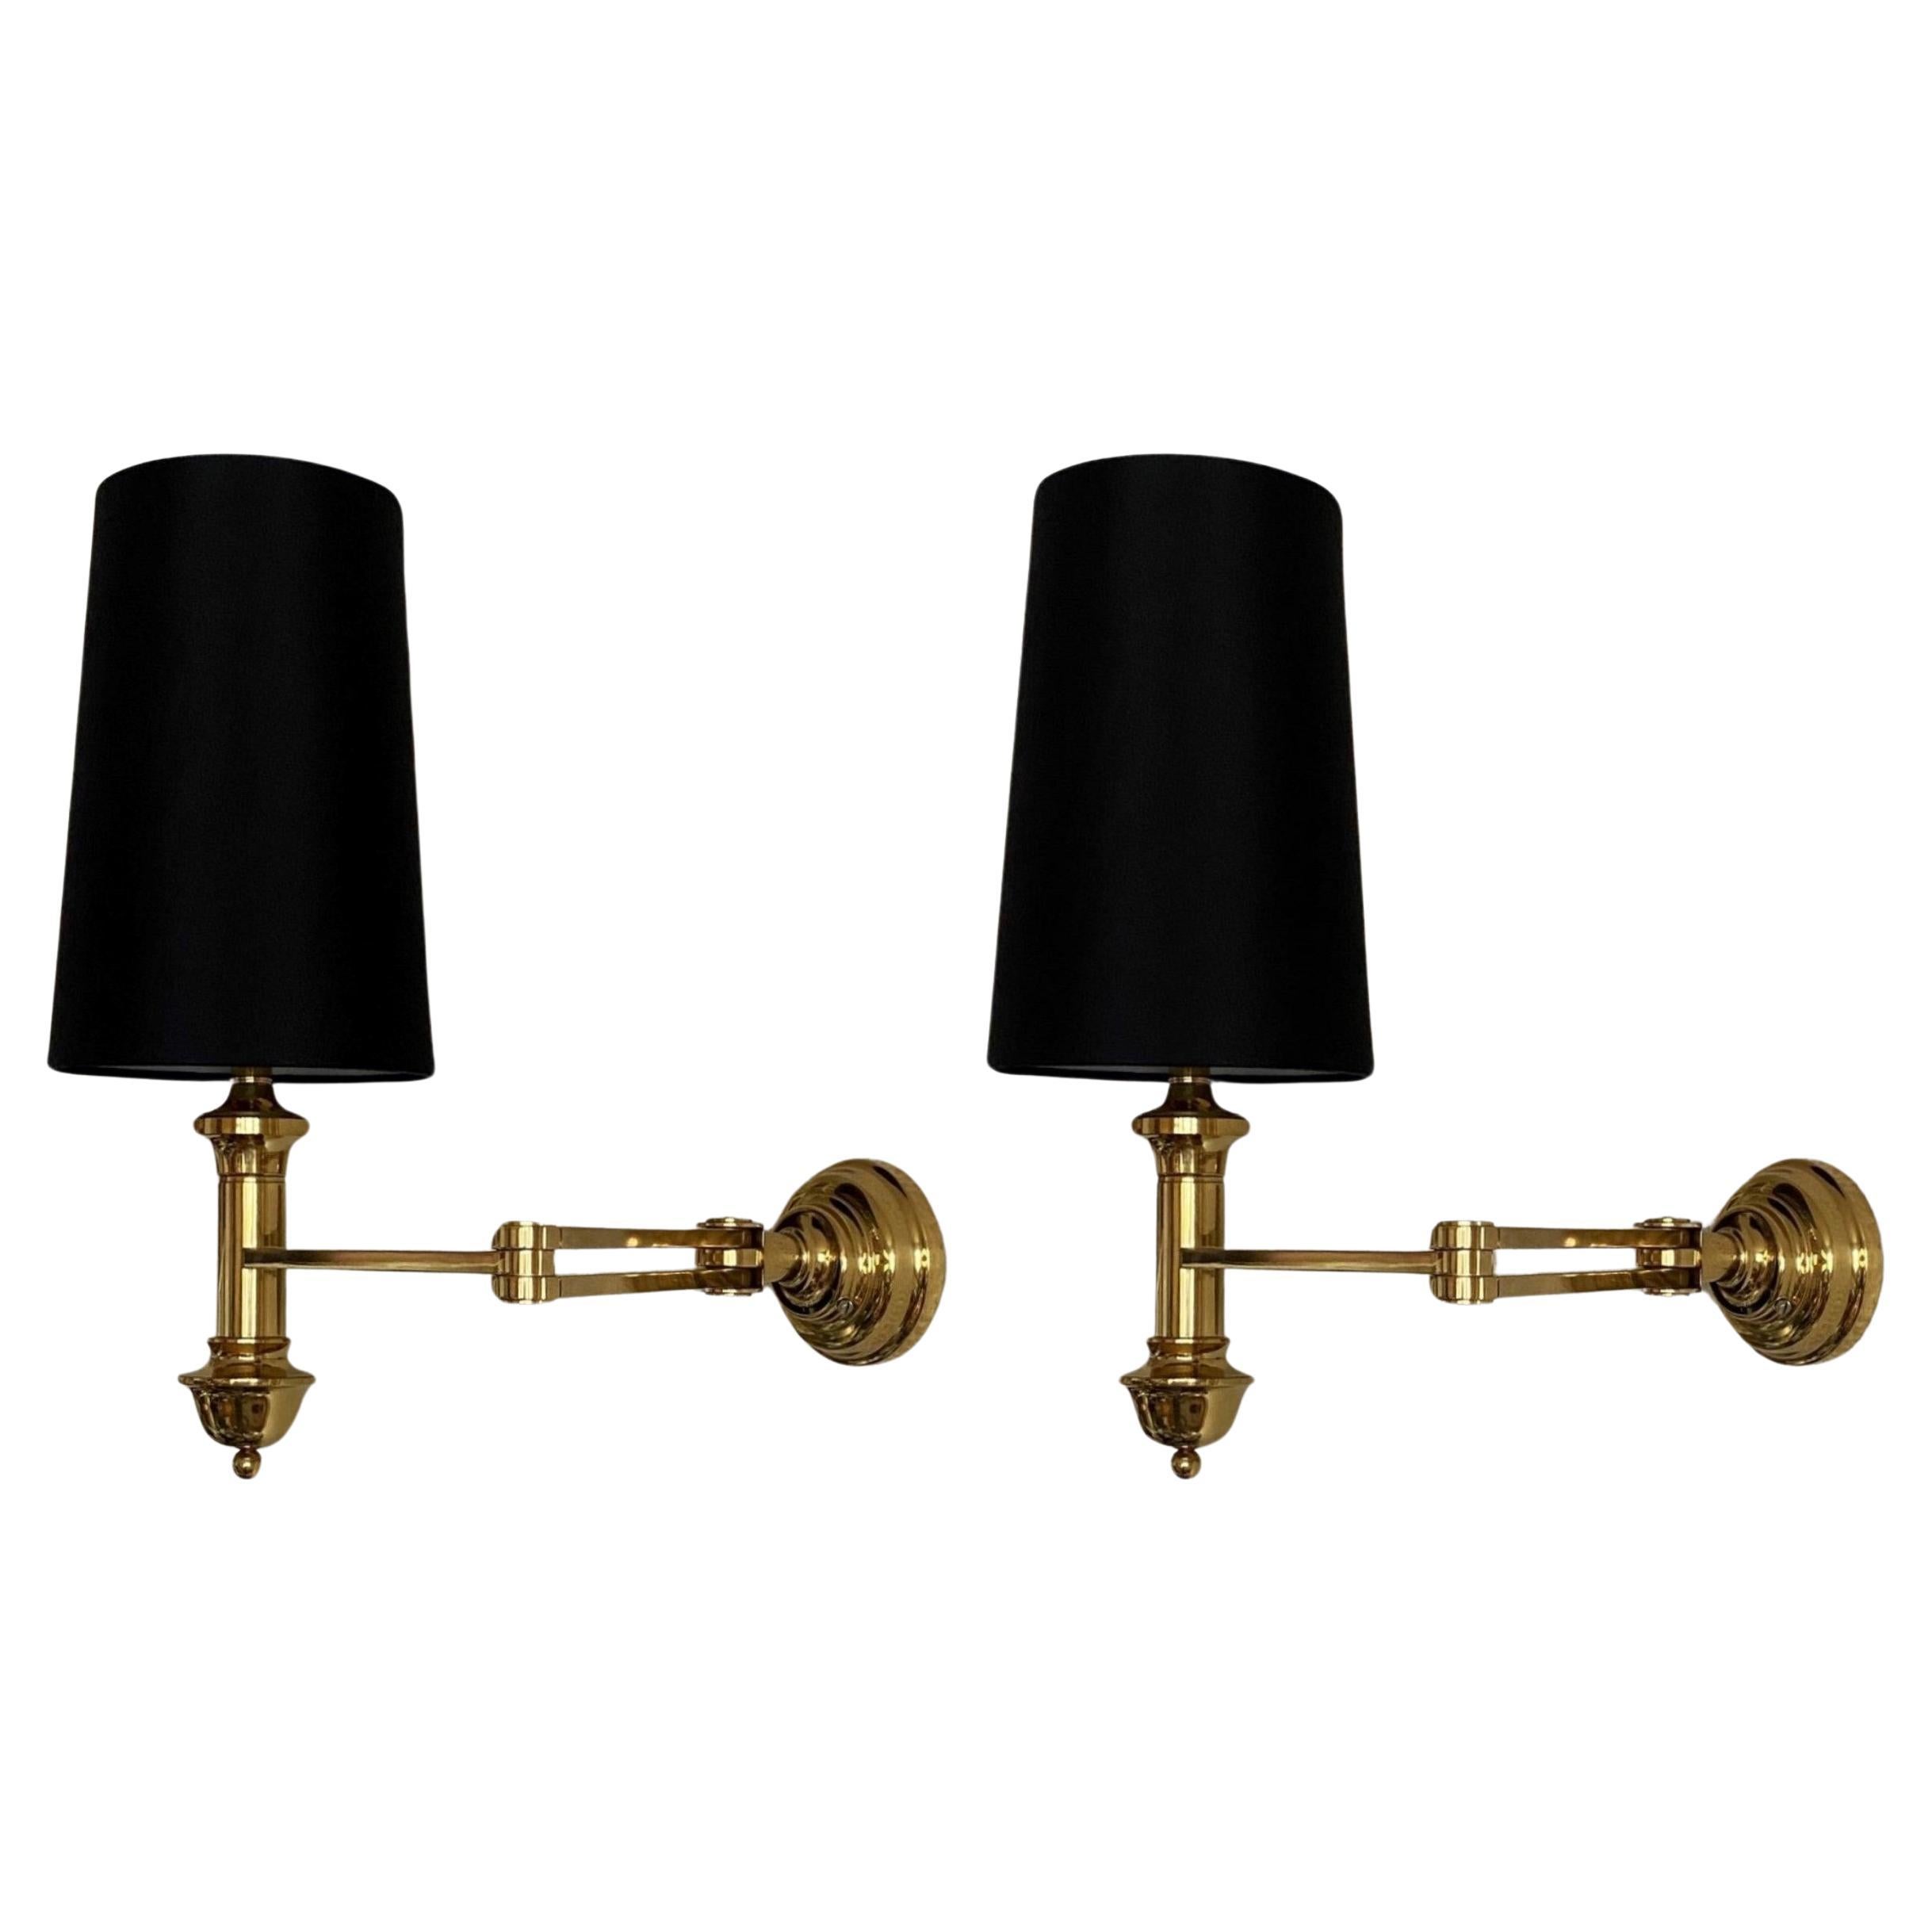 Pair of Brass Swing Arm Wall Lights, 1960s For Sale